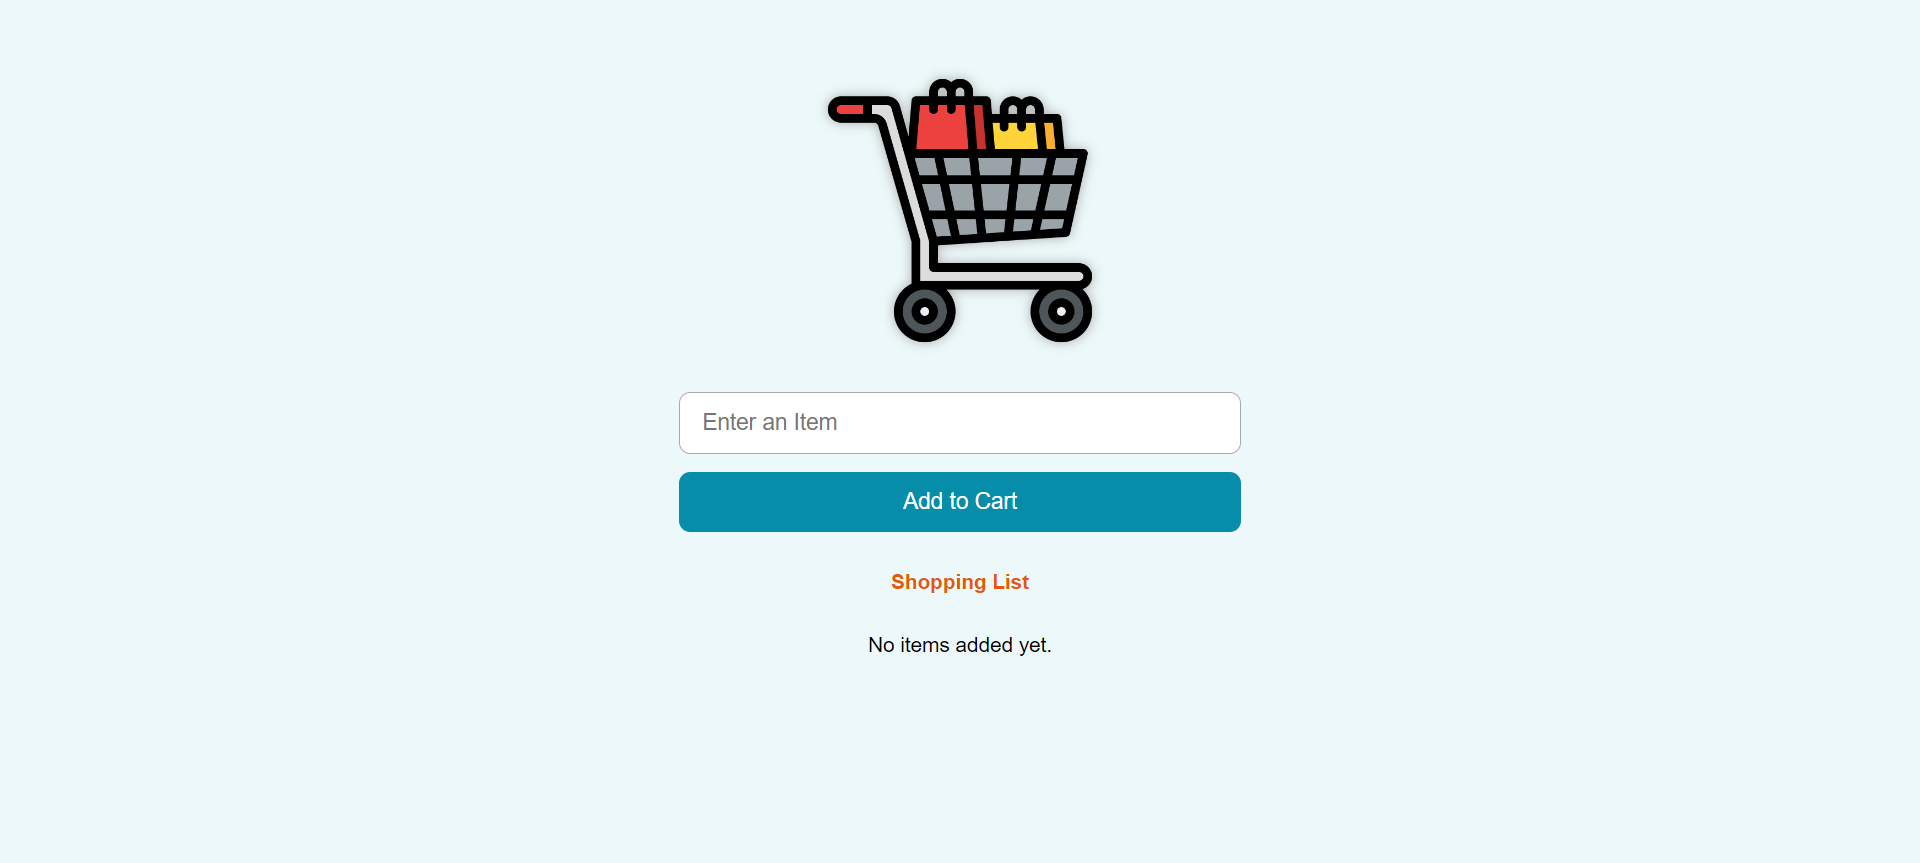 Grocery List made with JavaScript and Firebase